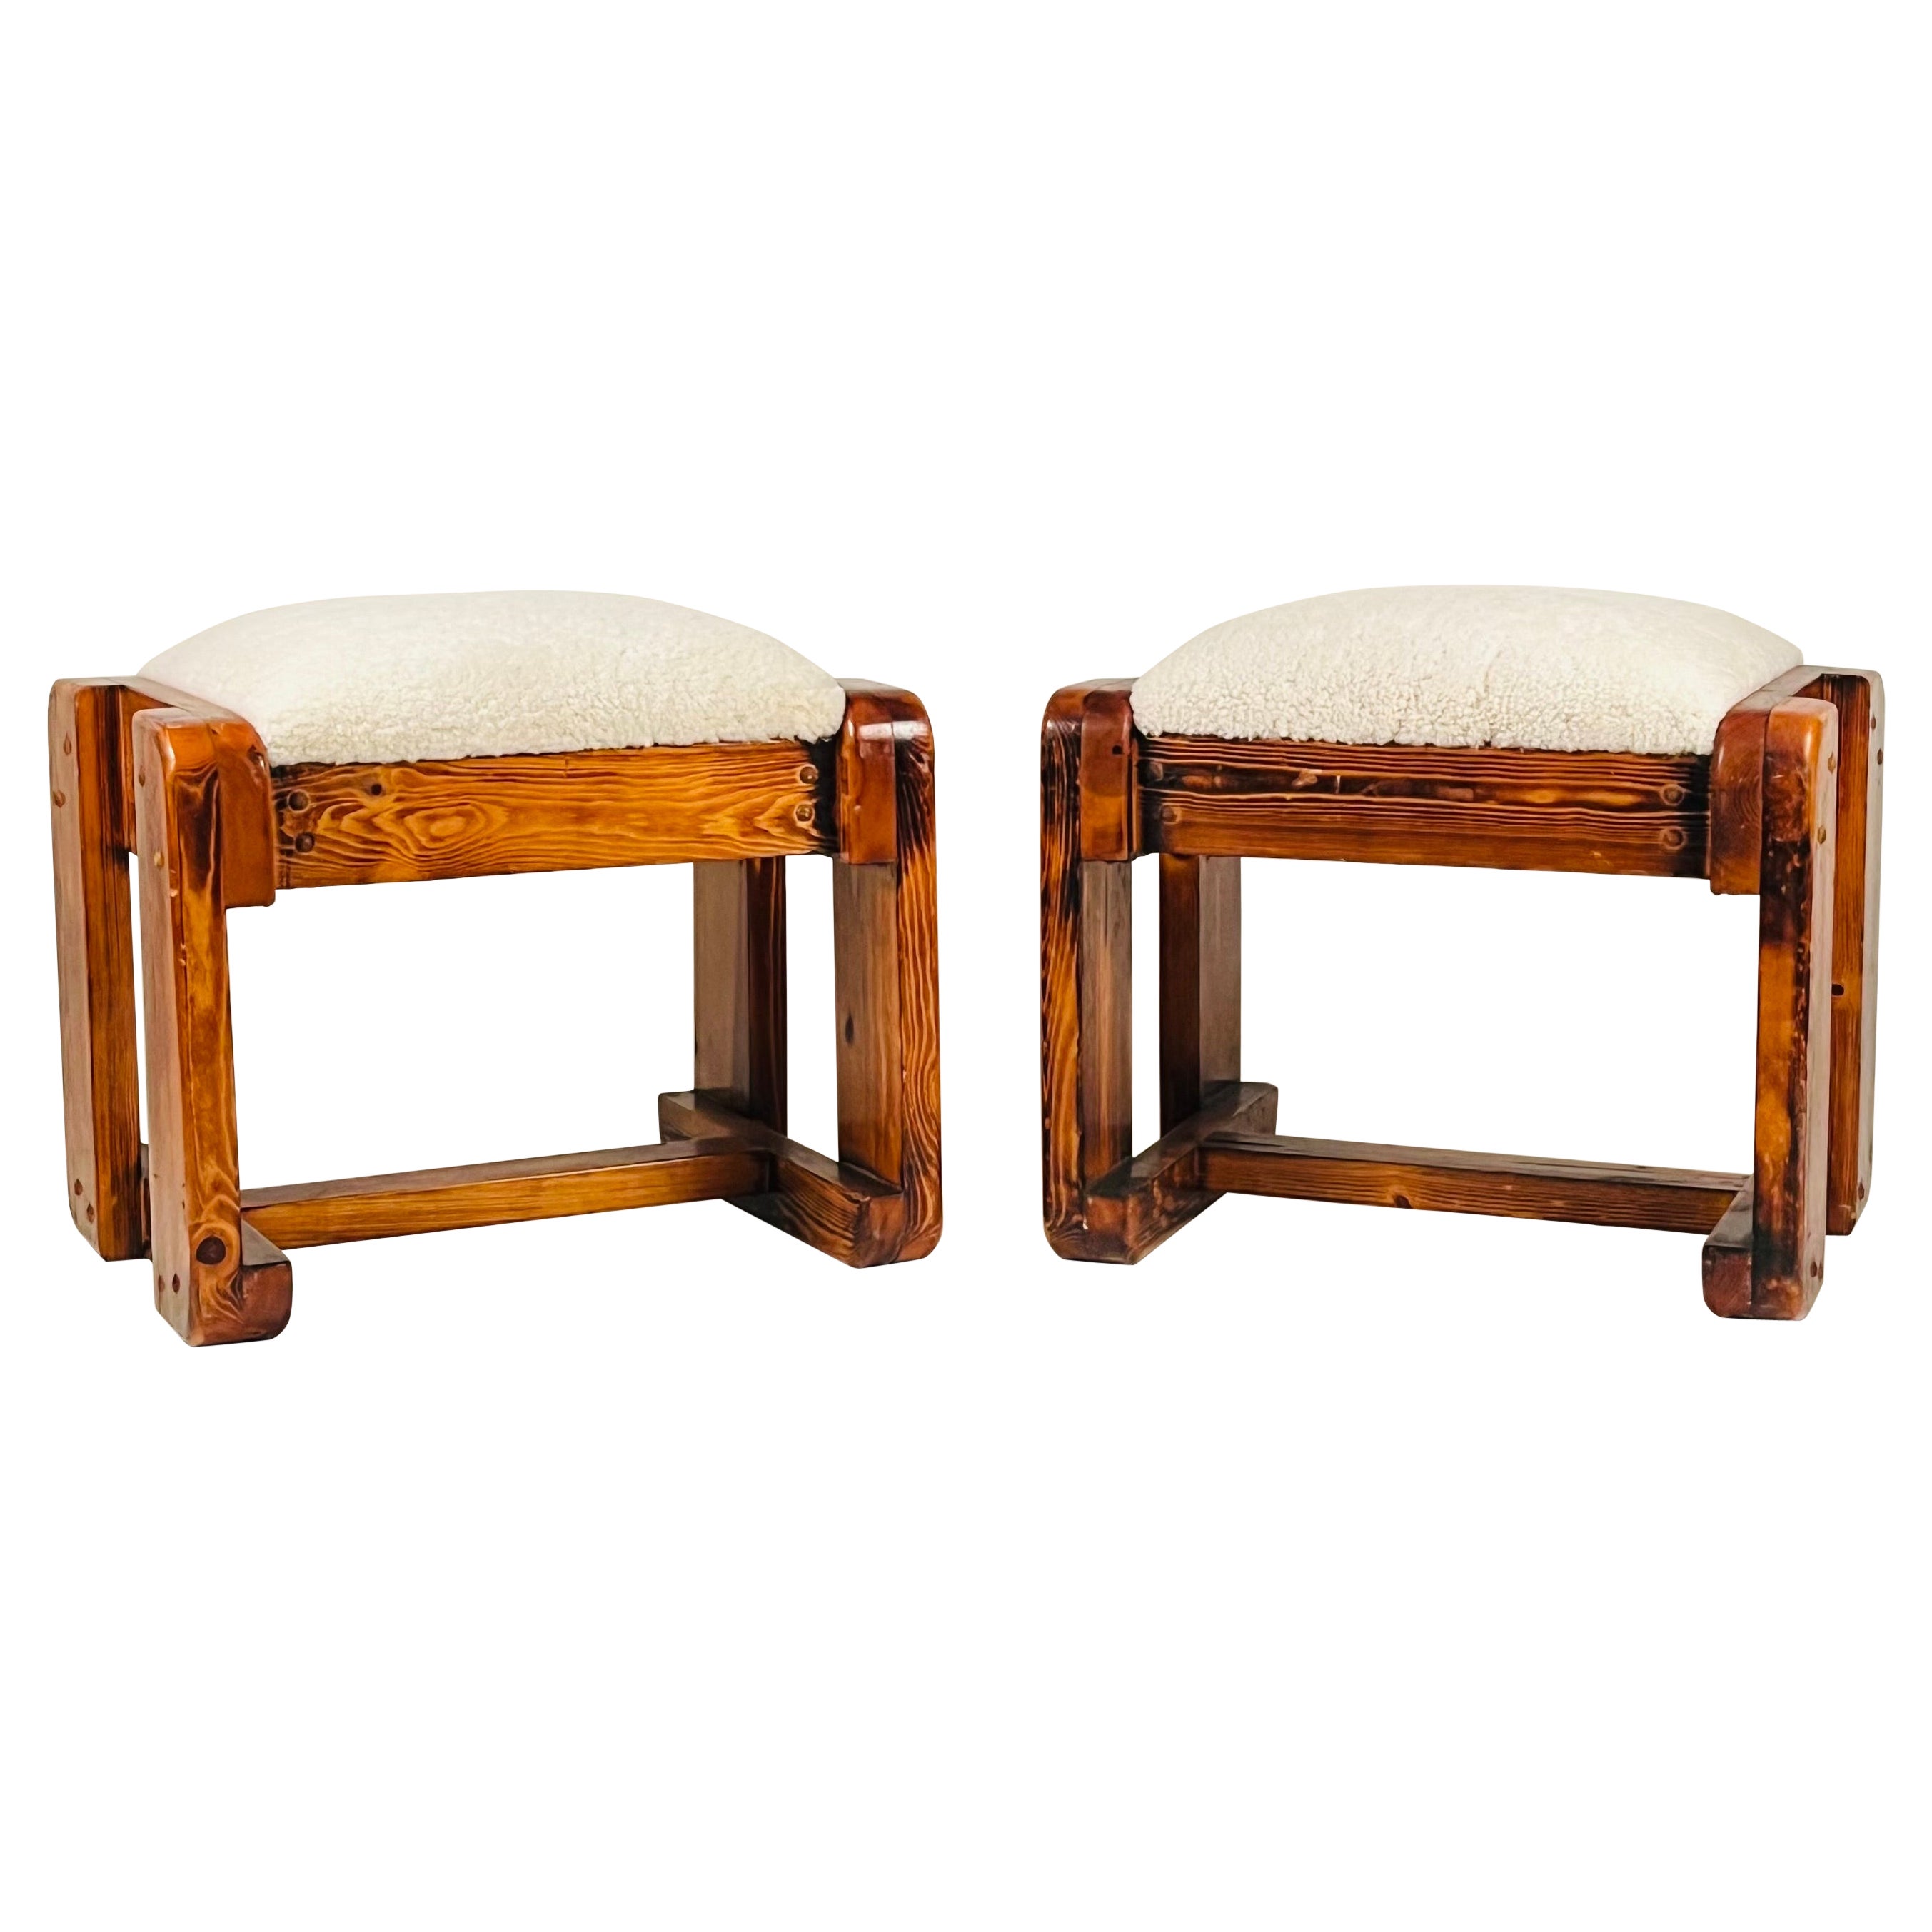 Pair of Pine Stools with Shearling Upholstery